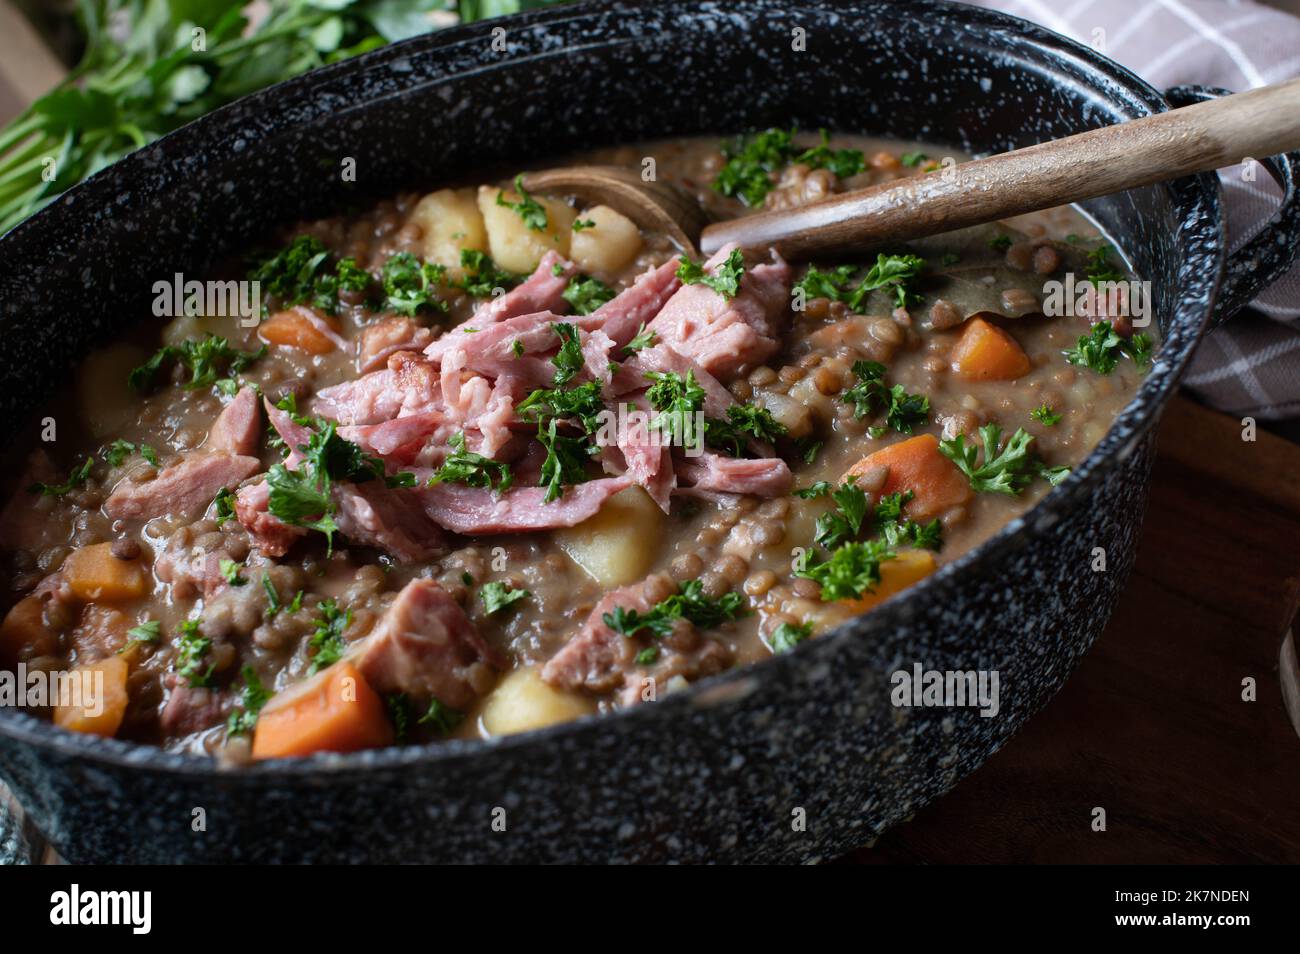 Legume stew with brown lentils, vegetables, potatoes and smoked pork meat Stock Photo